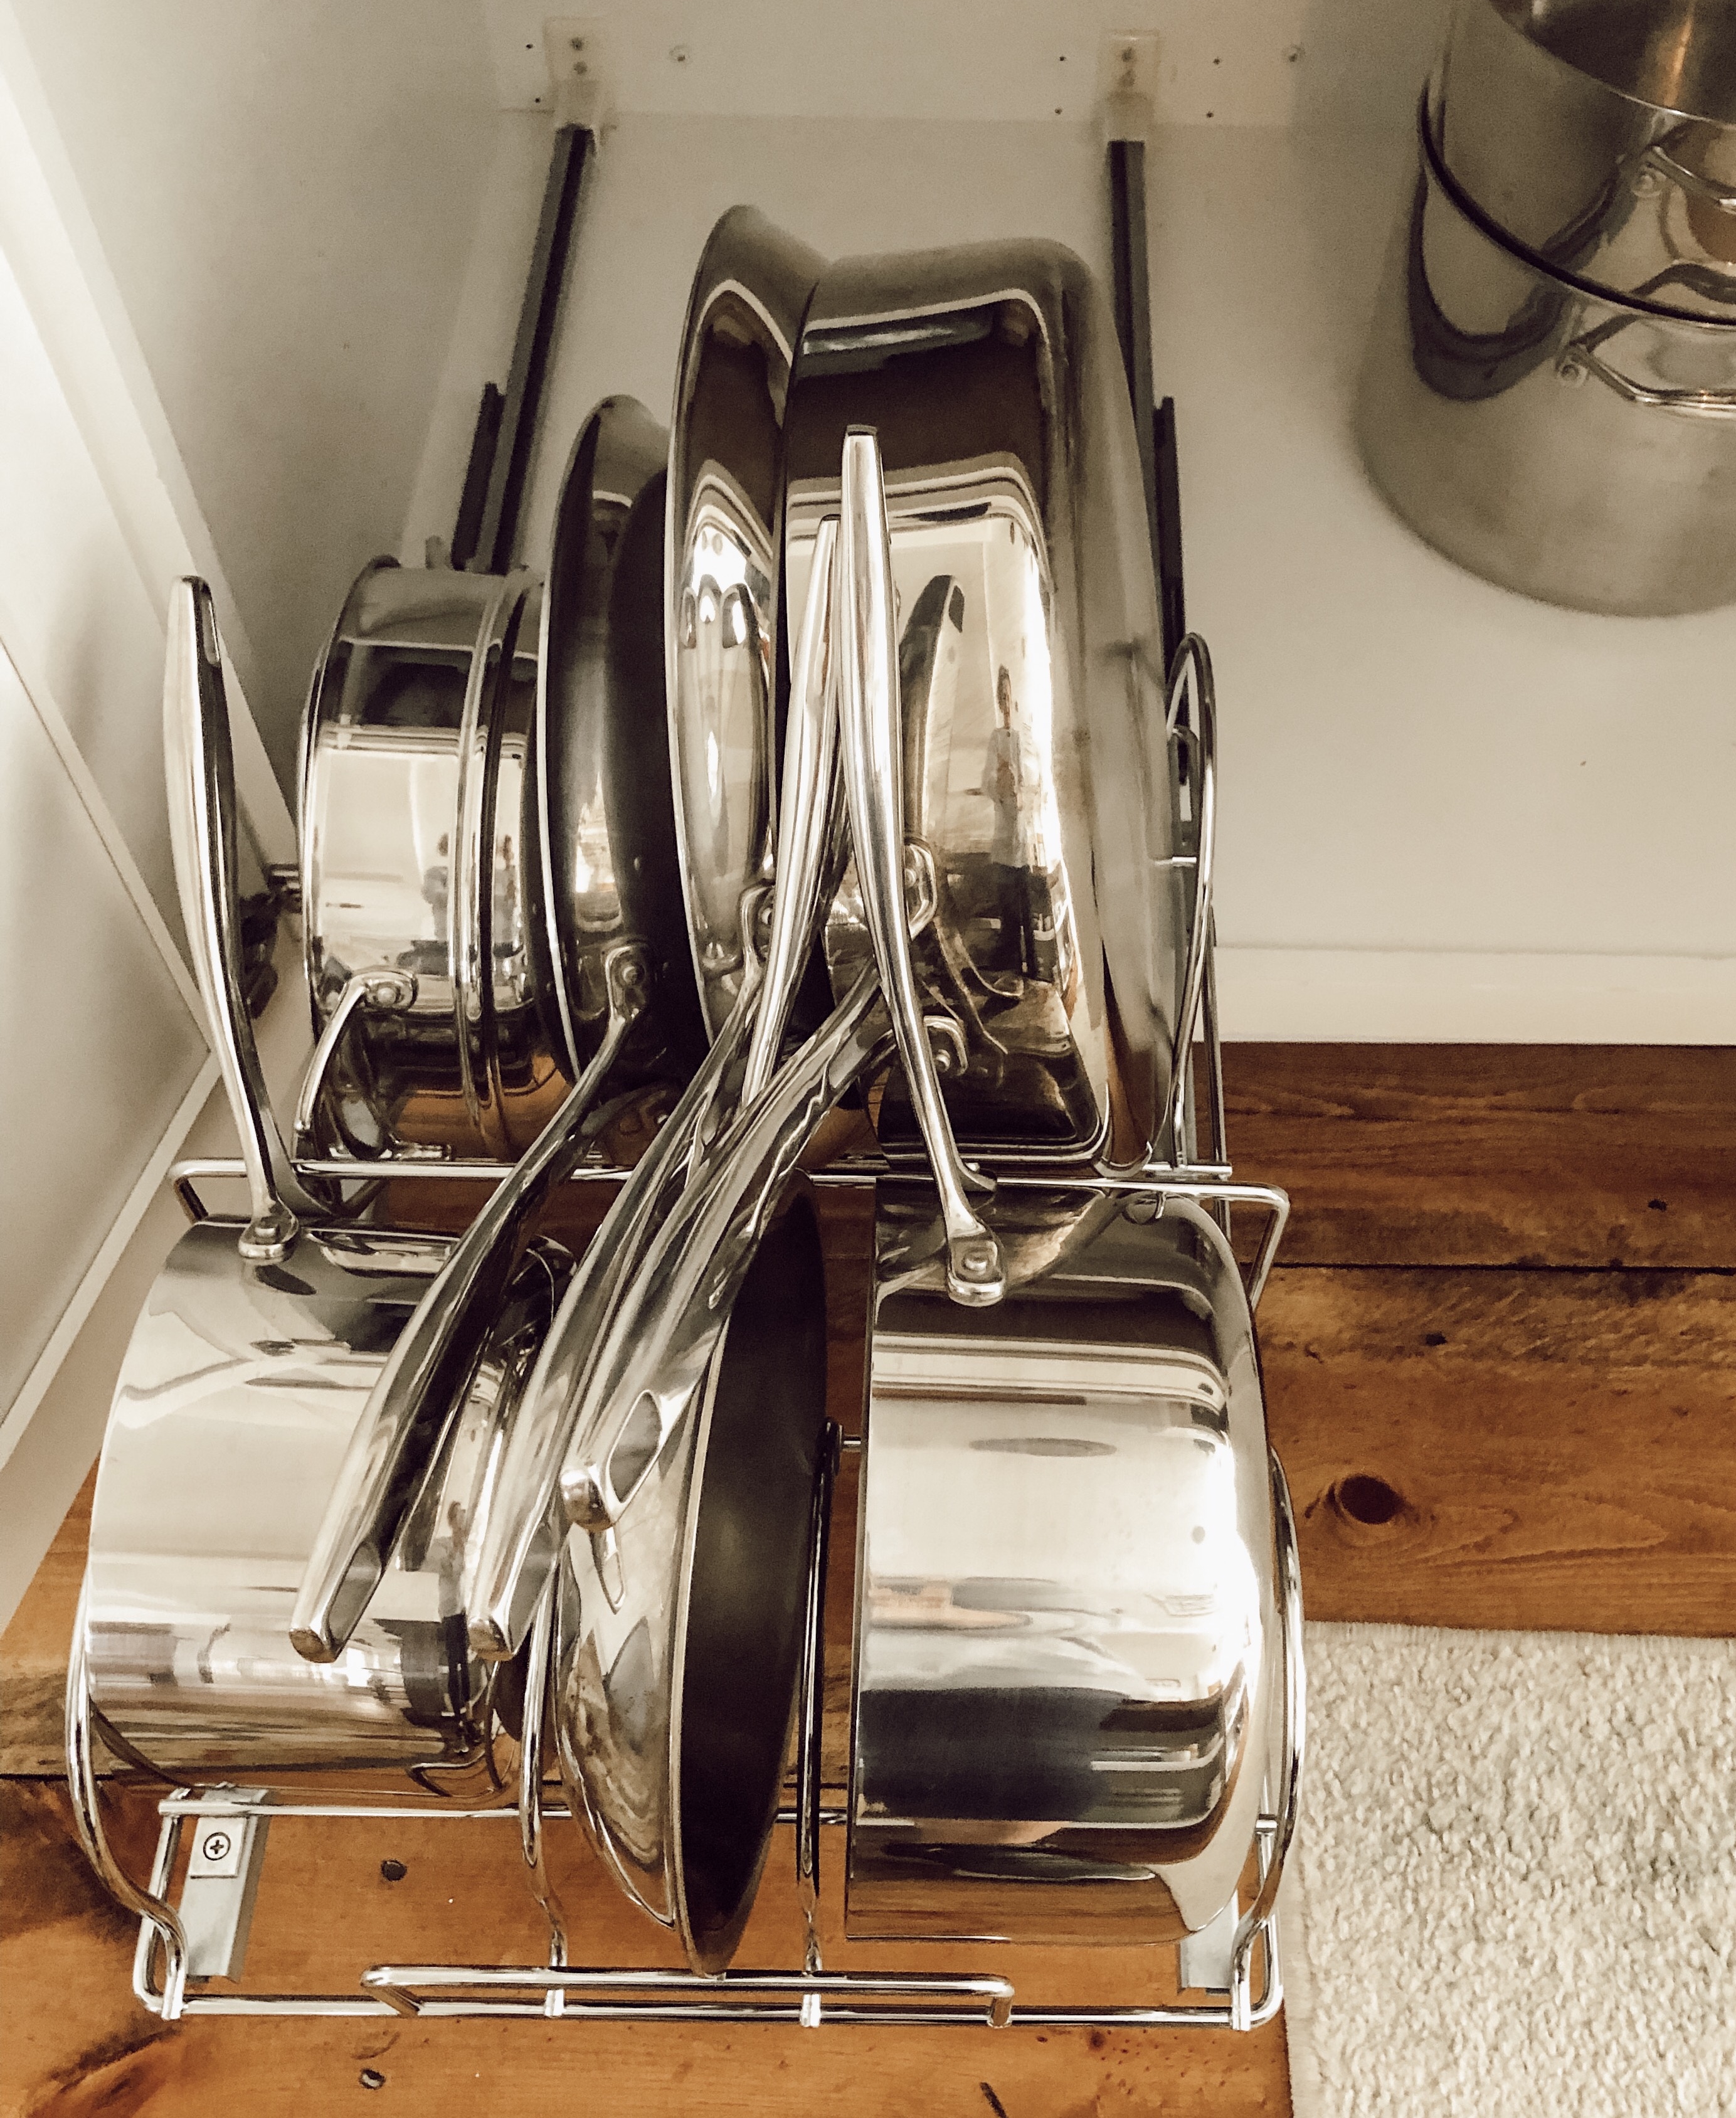 Kitchen Organization - Pots and Pans Pull out drawer - House on Winchester